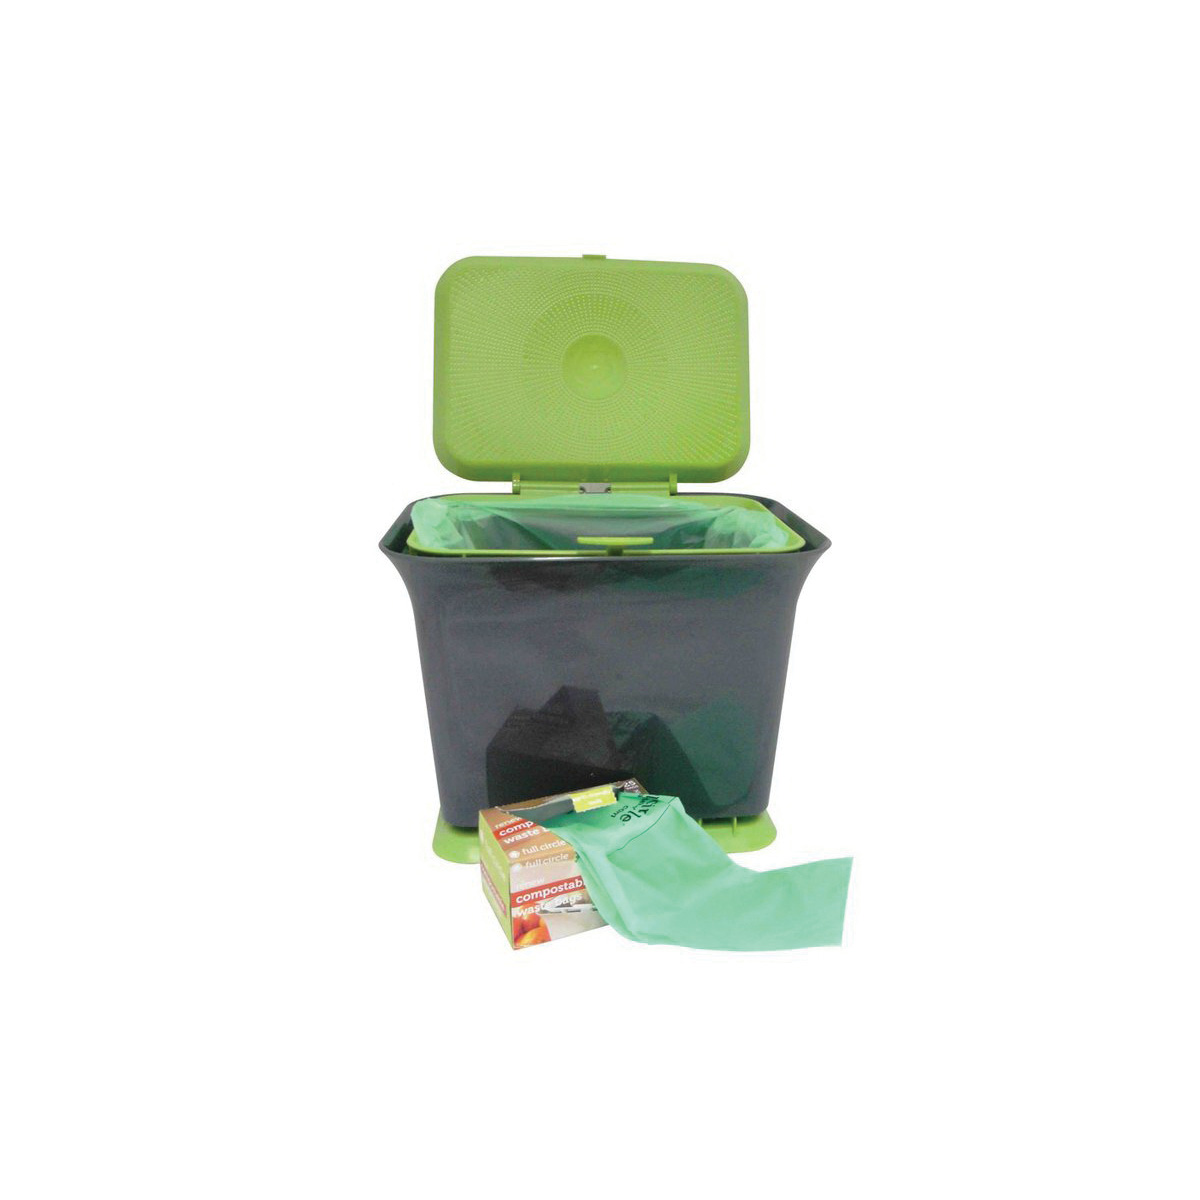 Full Circle FC11301-GS Compost Collector, 1.5 gal Capacity, Plastic/Steel, Green, 8-1/2 in W, 11.38 in D, 9 in H - 2